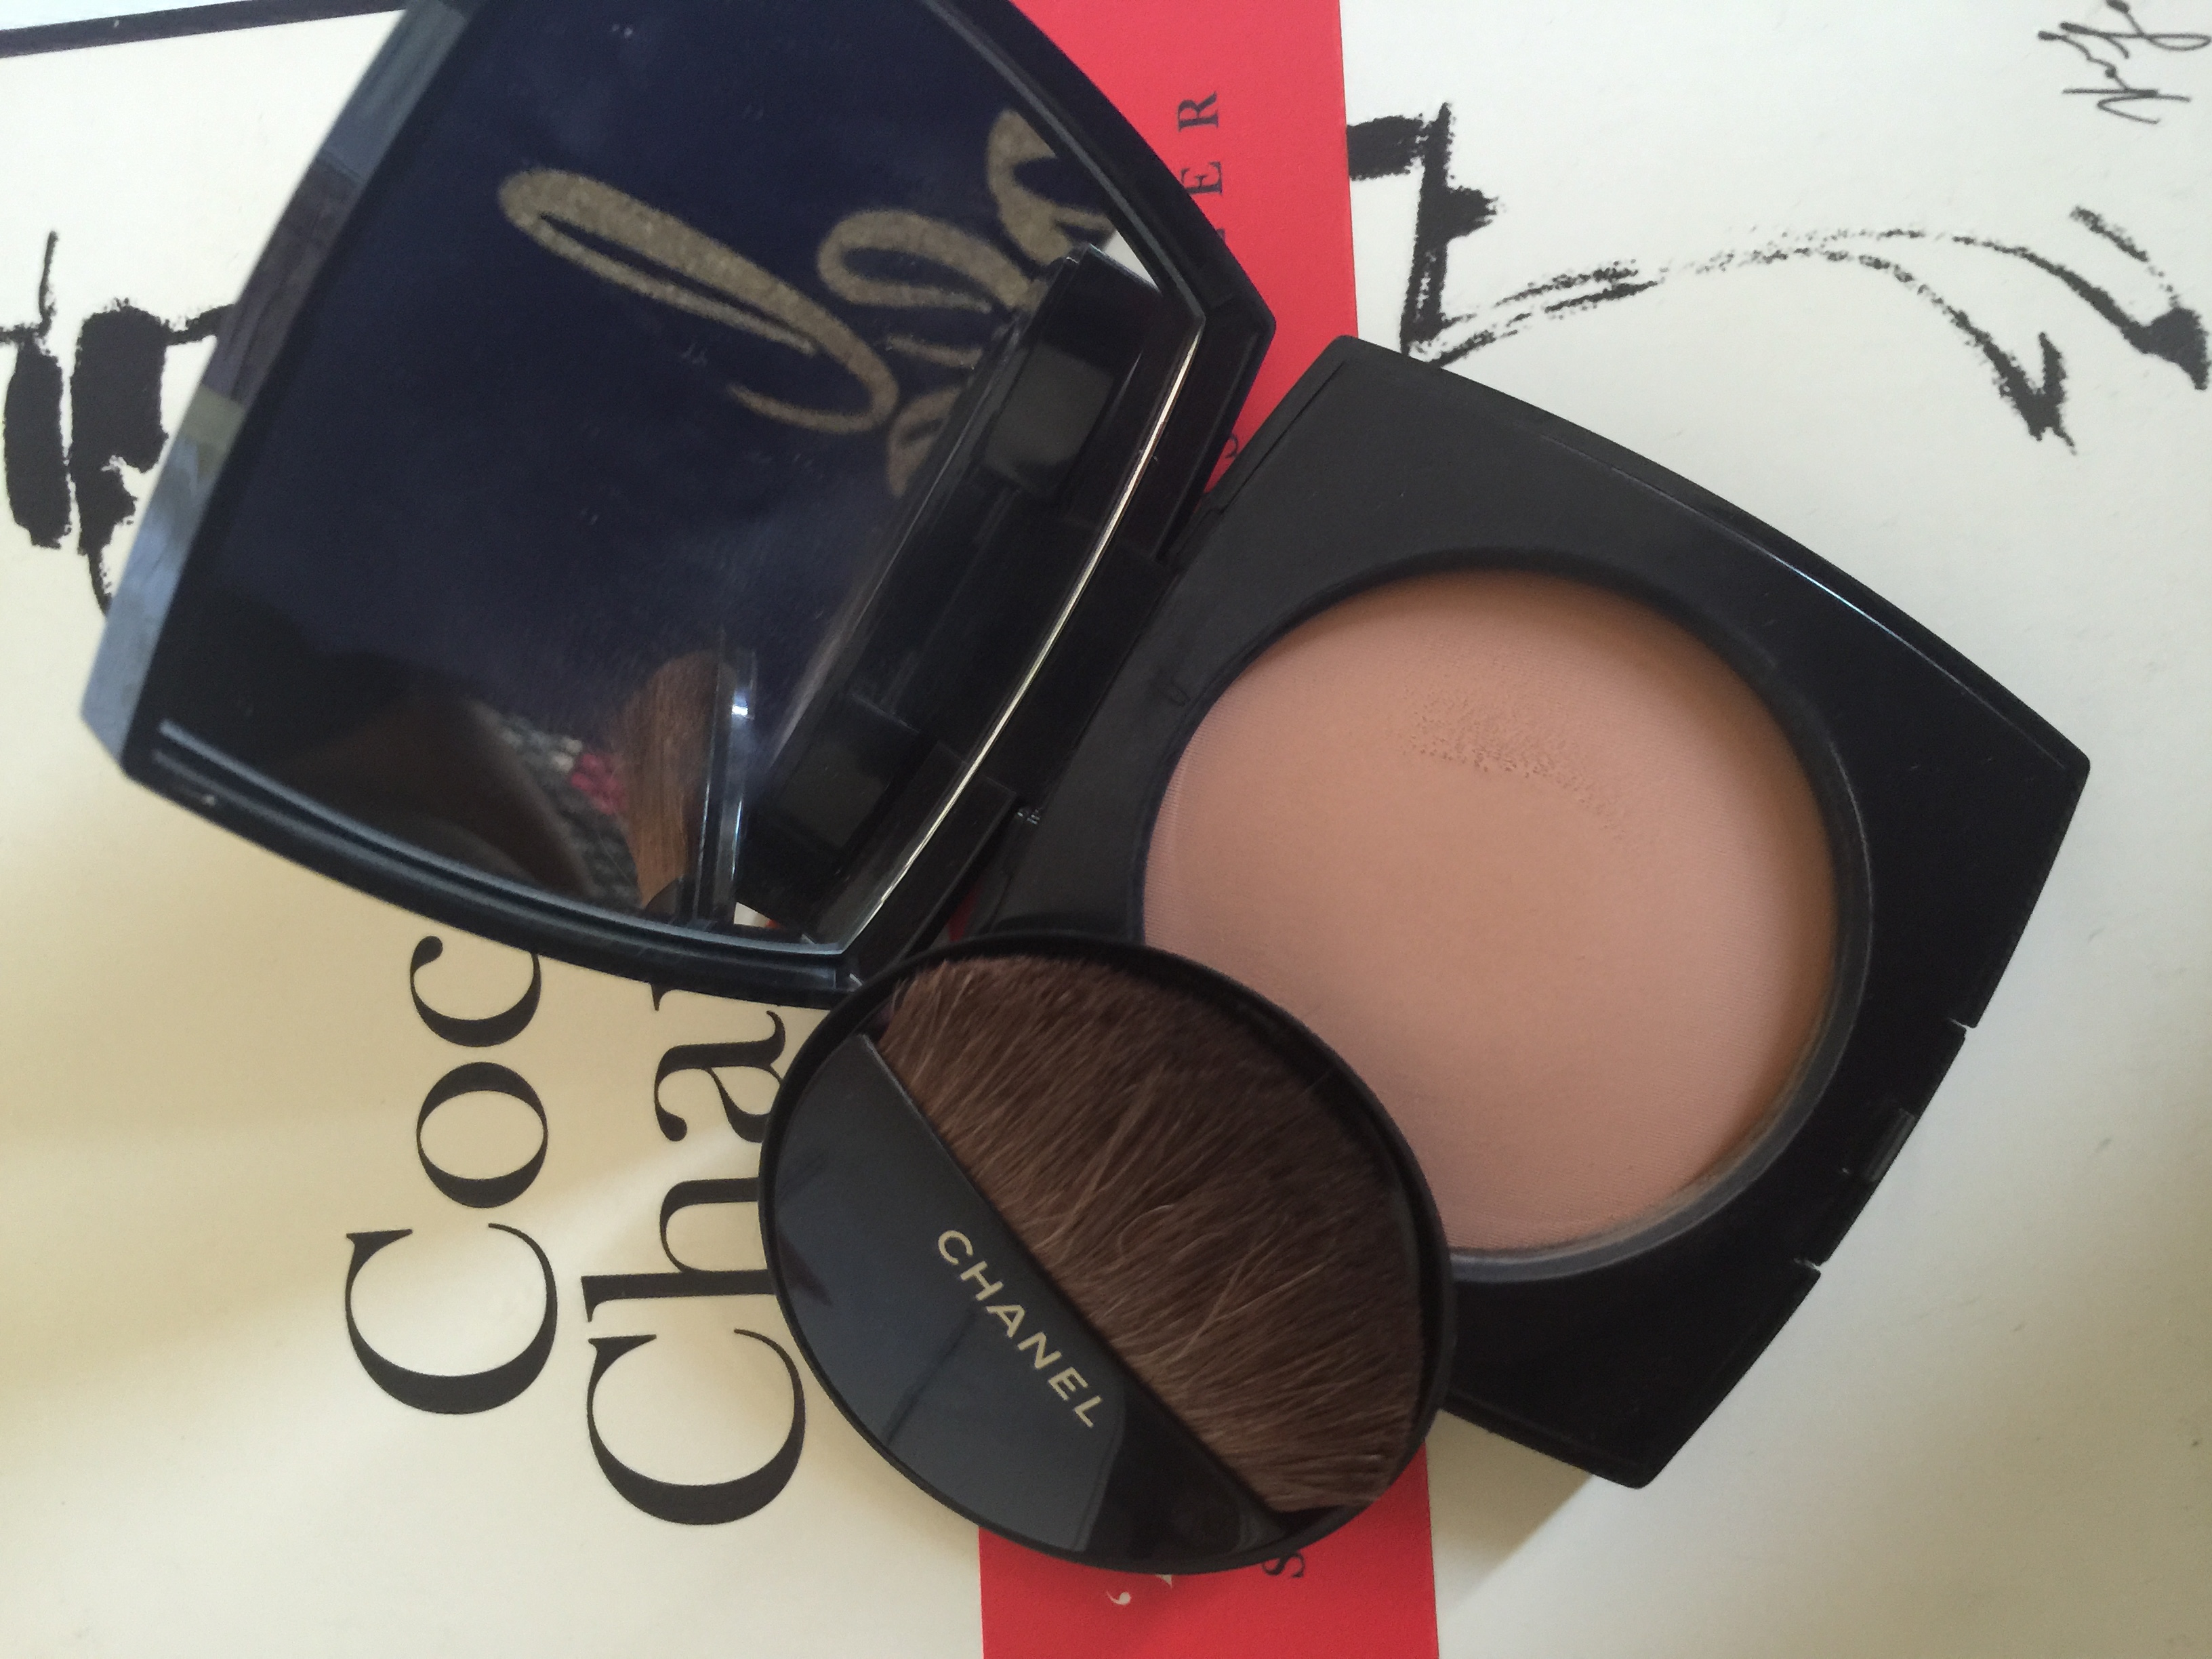 Chanel Les Beiges Healthy Glow Sheer Powder, SPF 15, No. 30, 0.4